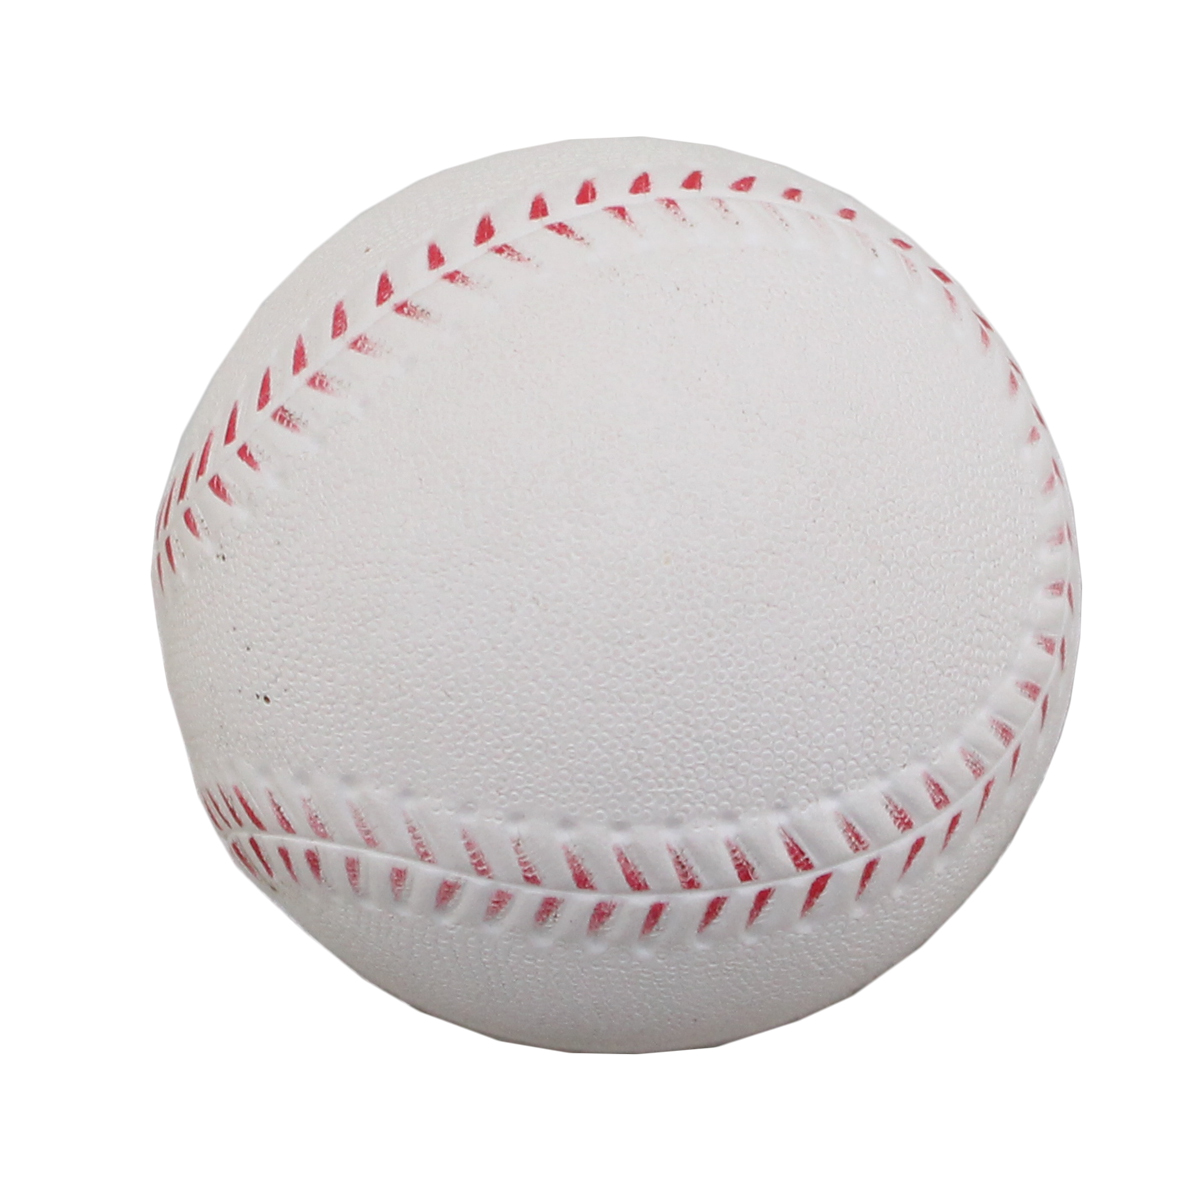 Baseball Promotional Stress Reliever